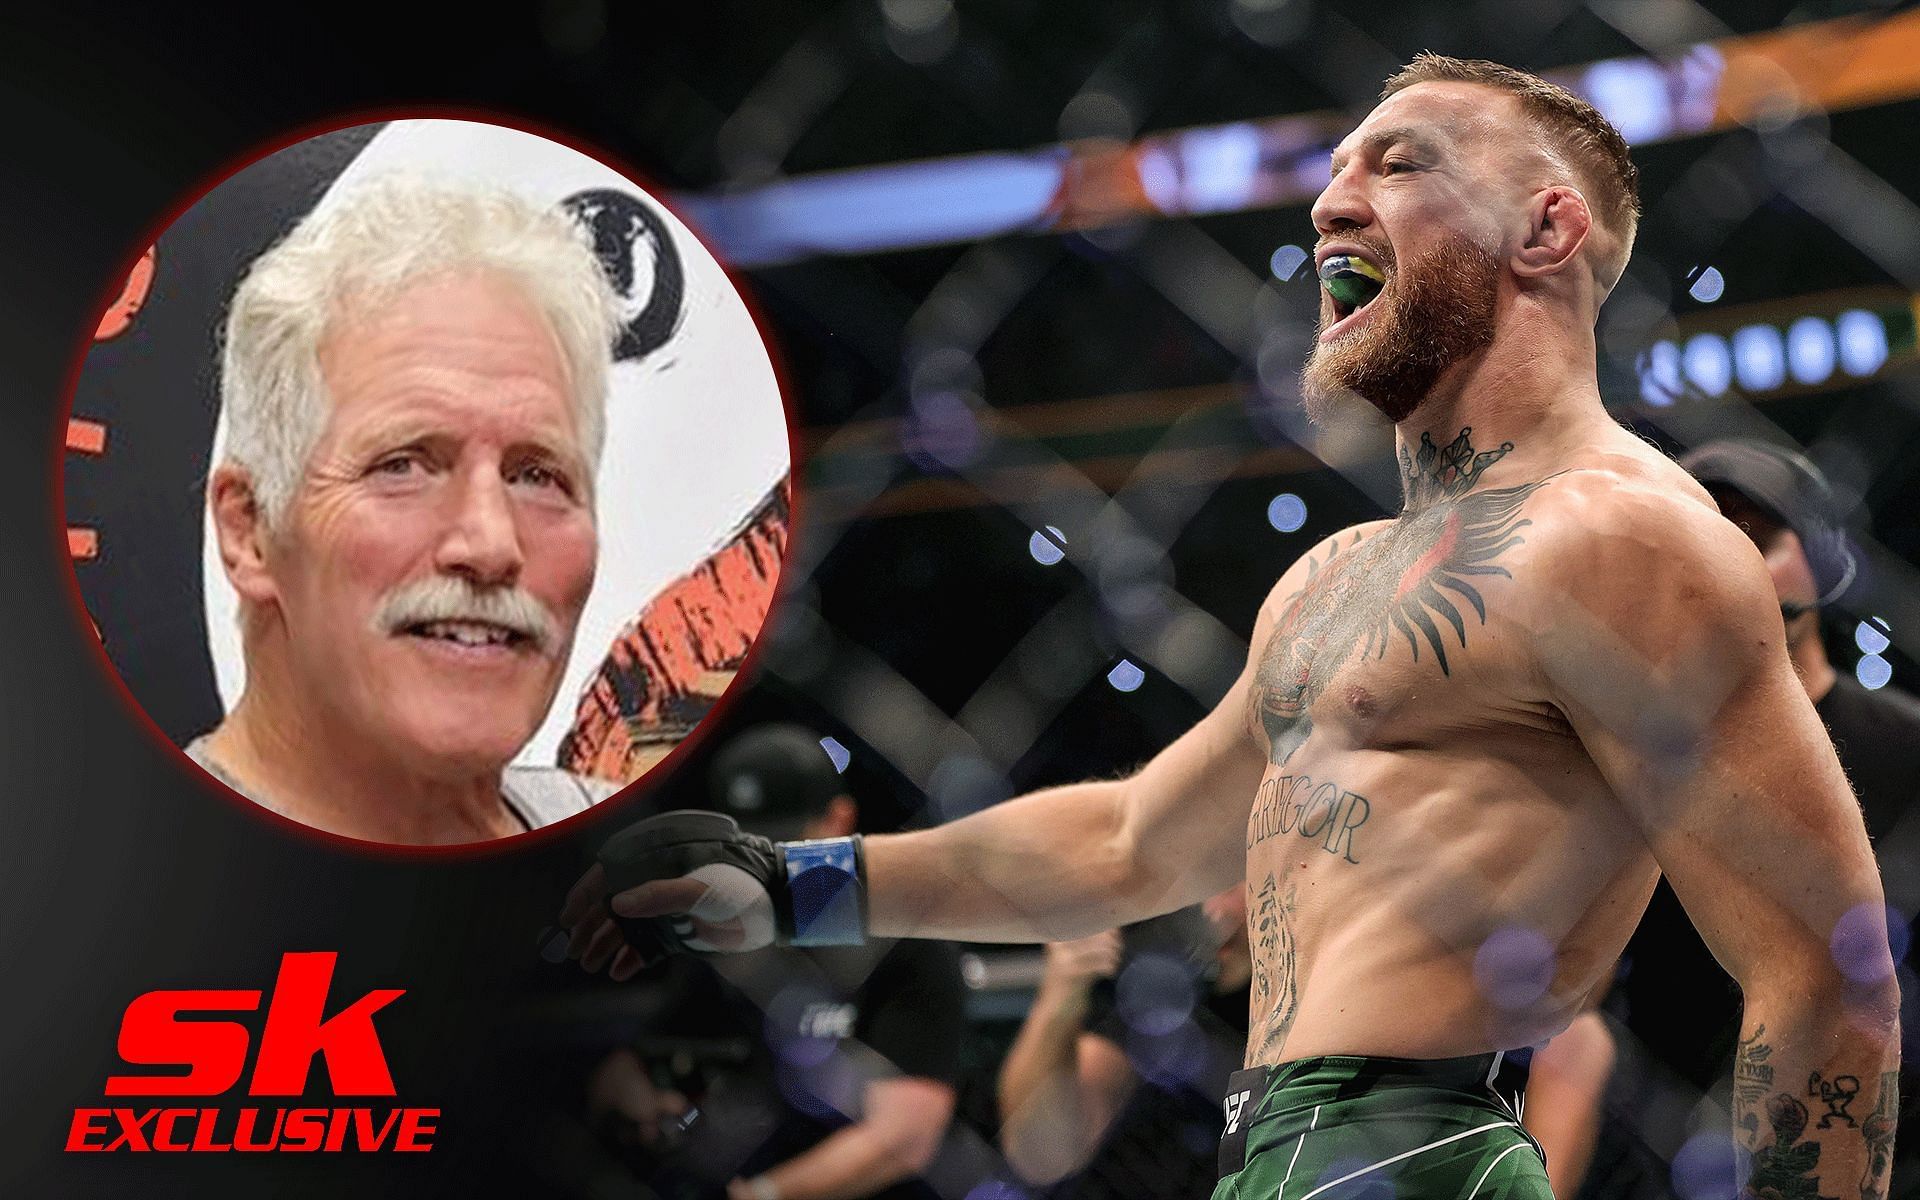 Dan Severn (inset) and Conor McGregor [Image credits: Getty Images and @tazzmma_fitness on Instagram] 